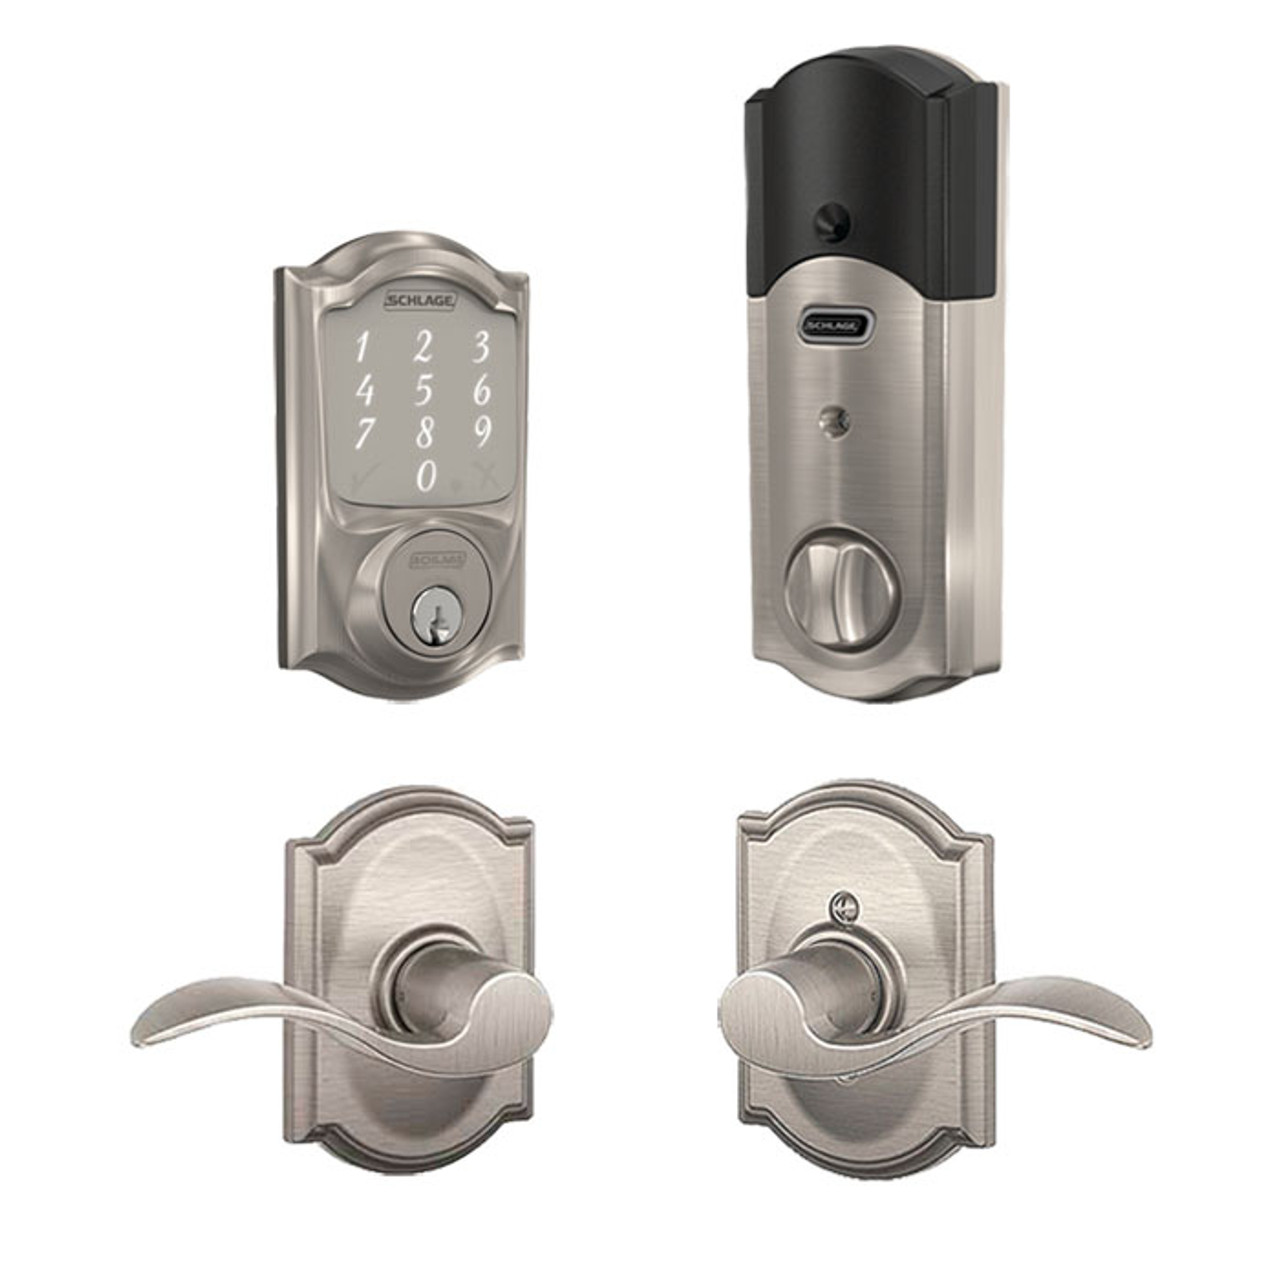 Schlage / BE479 Camelot Sense Deadbolt with Accent x Camelot Passage Lever  / Satin Nickel / FBE479CAM-ACCxCAM619